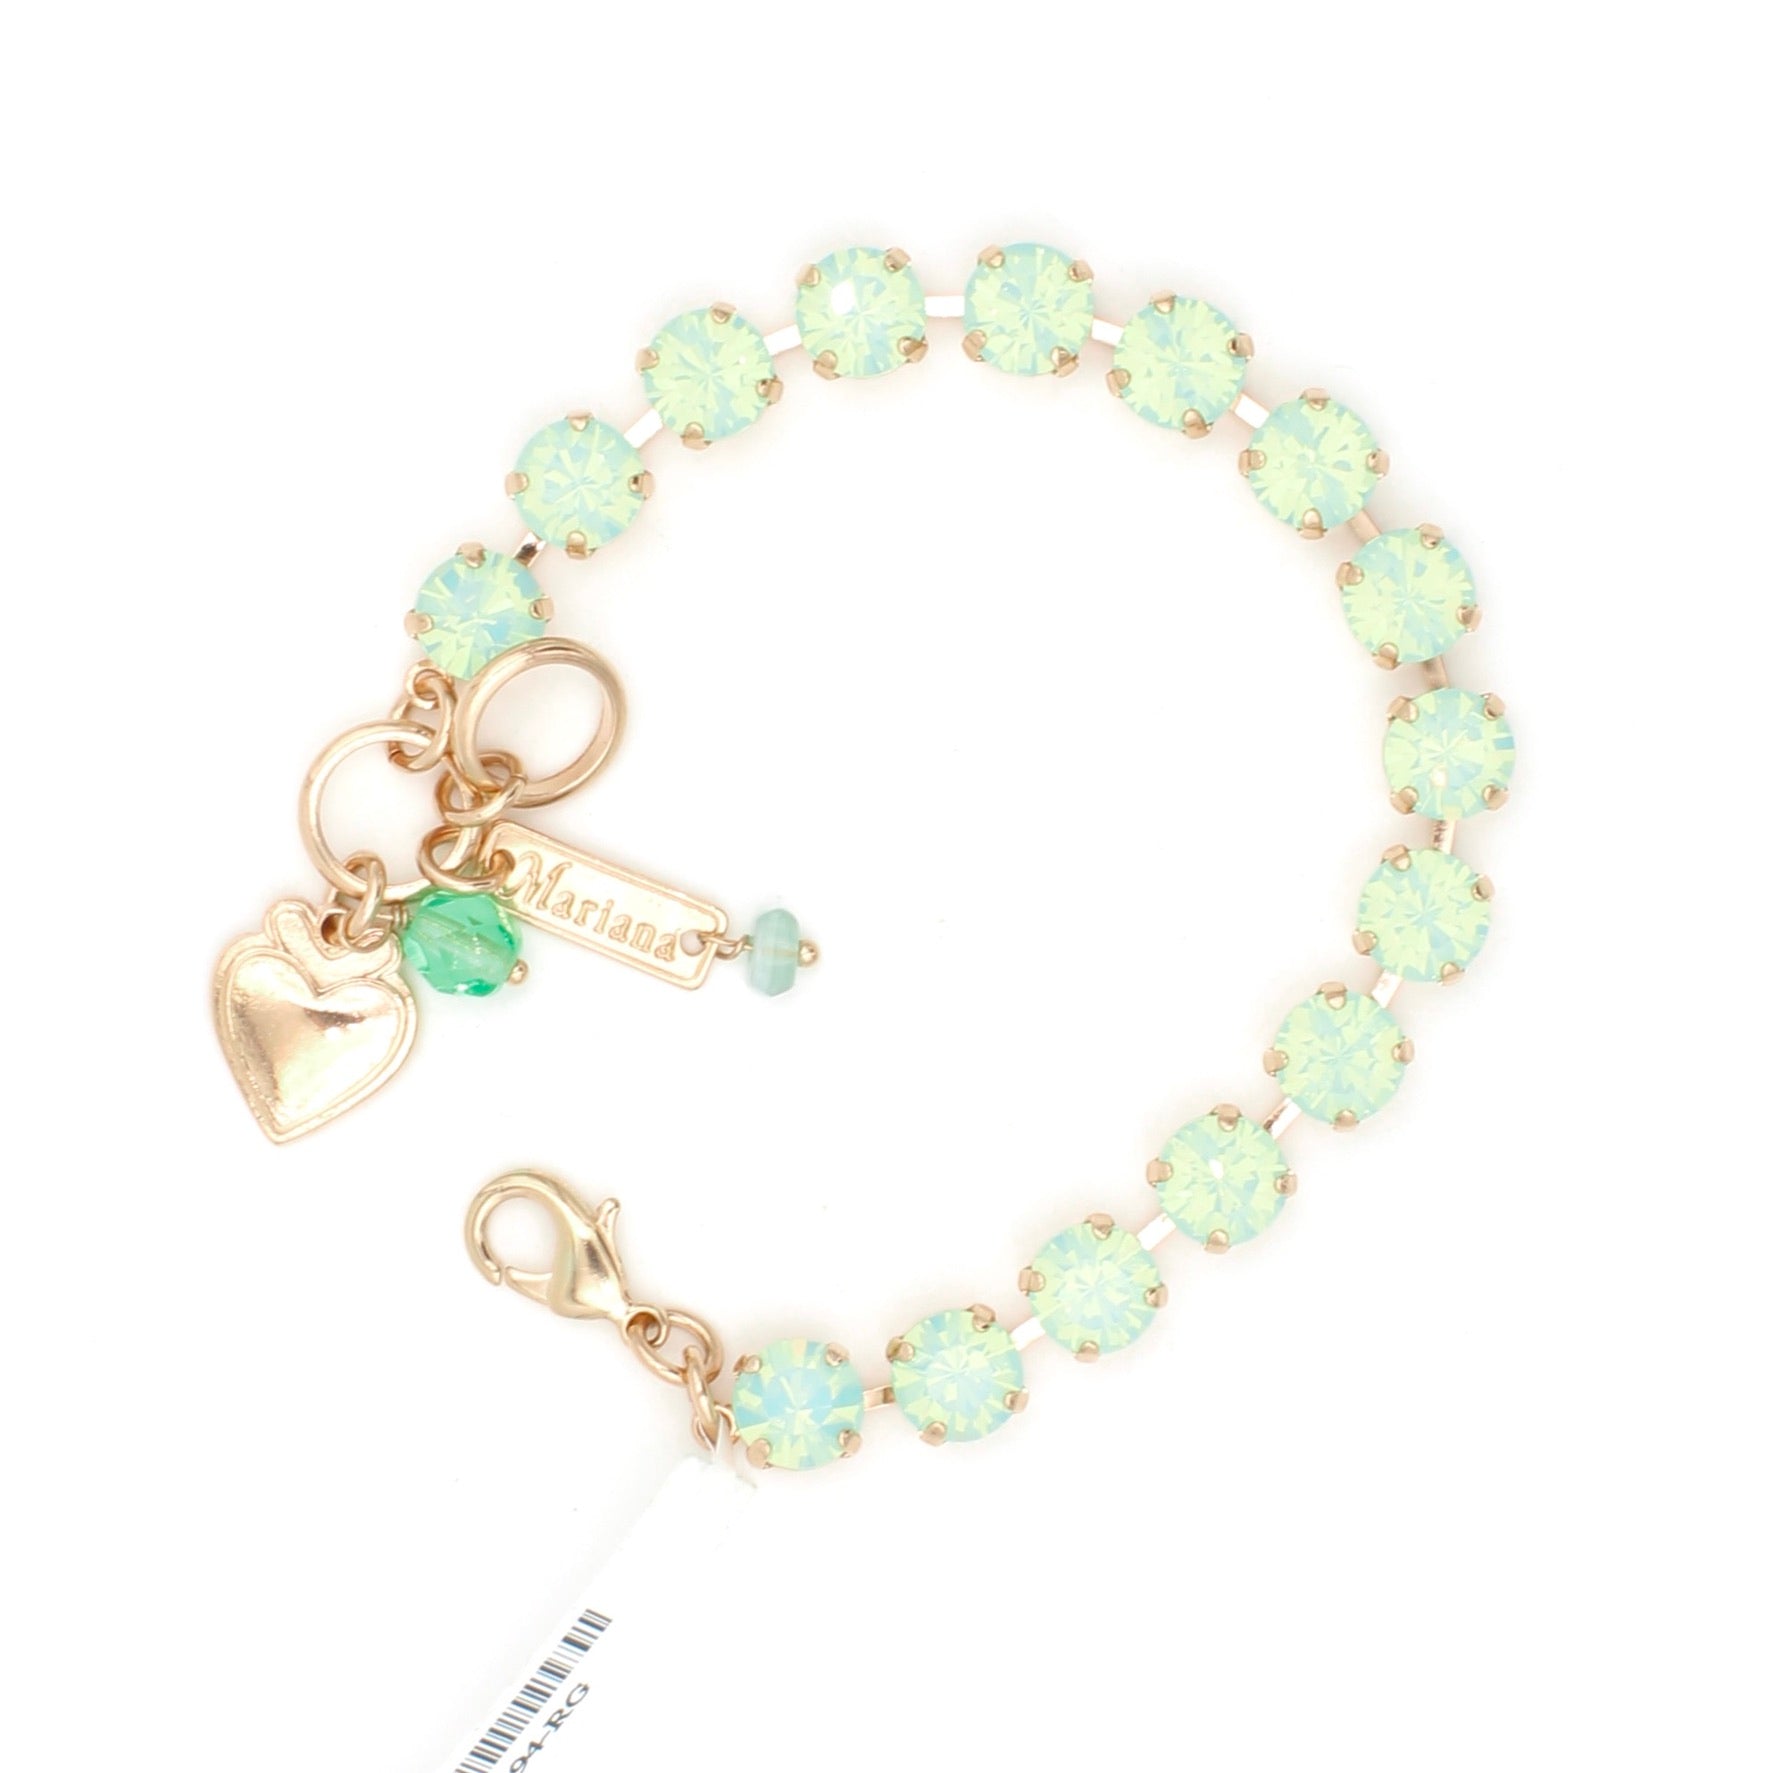 Chrysolite Opal Must Have Everyday Bracelet in Rose Gold - MaryTyke's